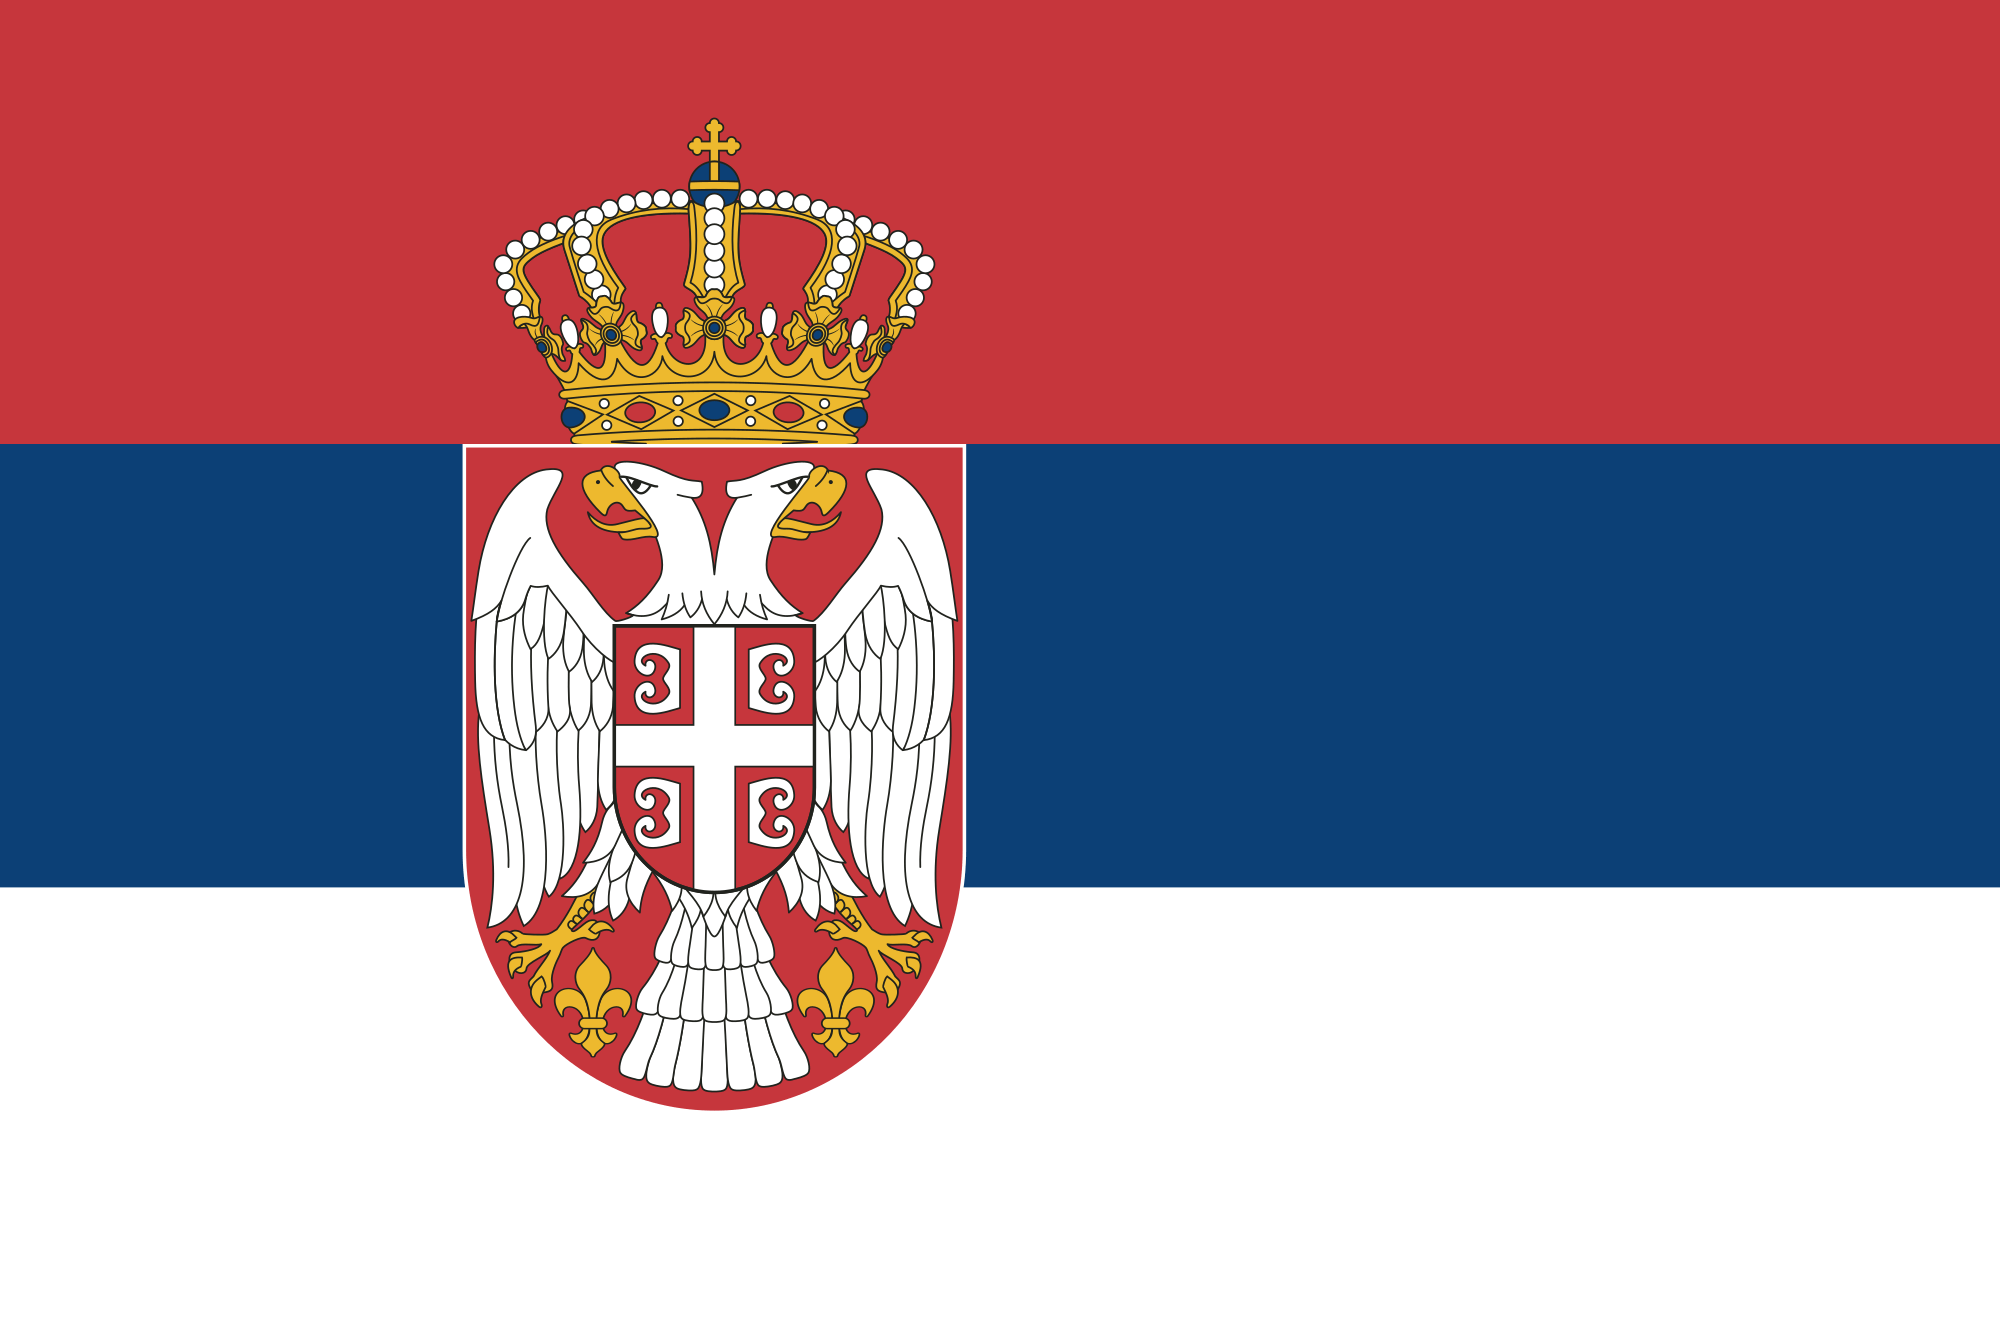 Lady Red White and Blue Eagles Logo - Flag of Serbia